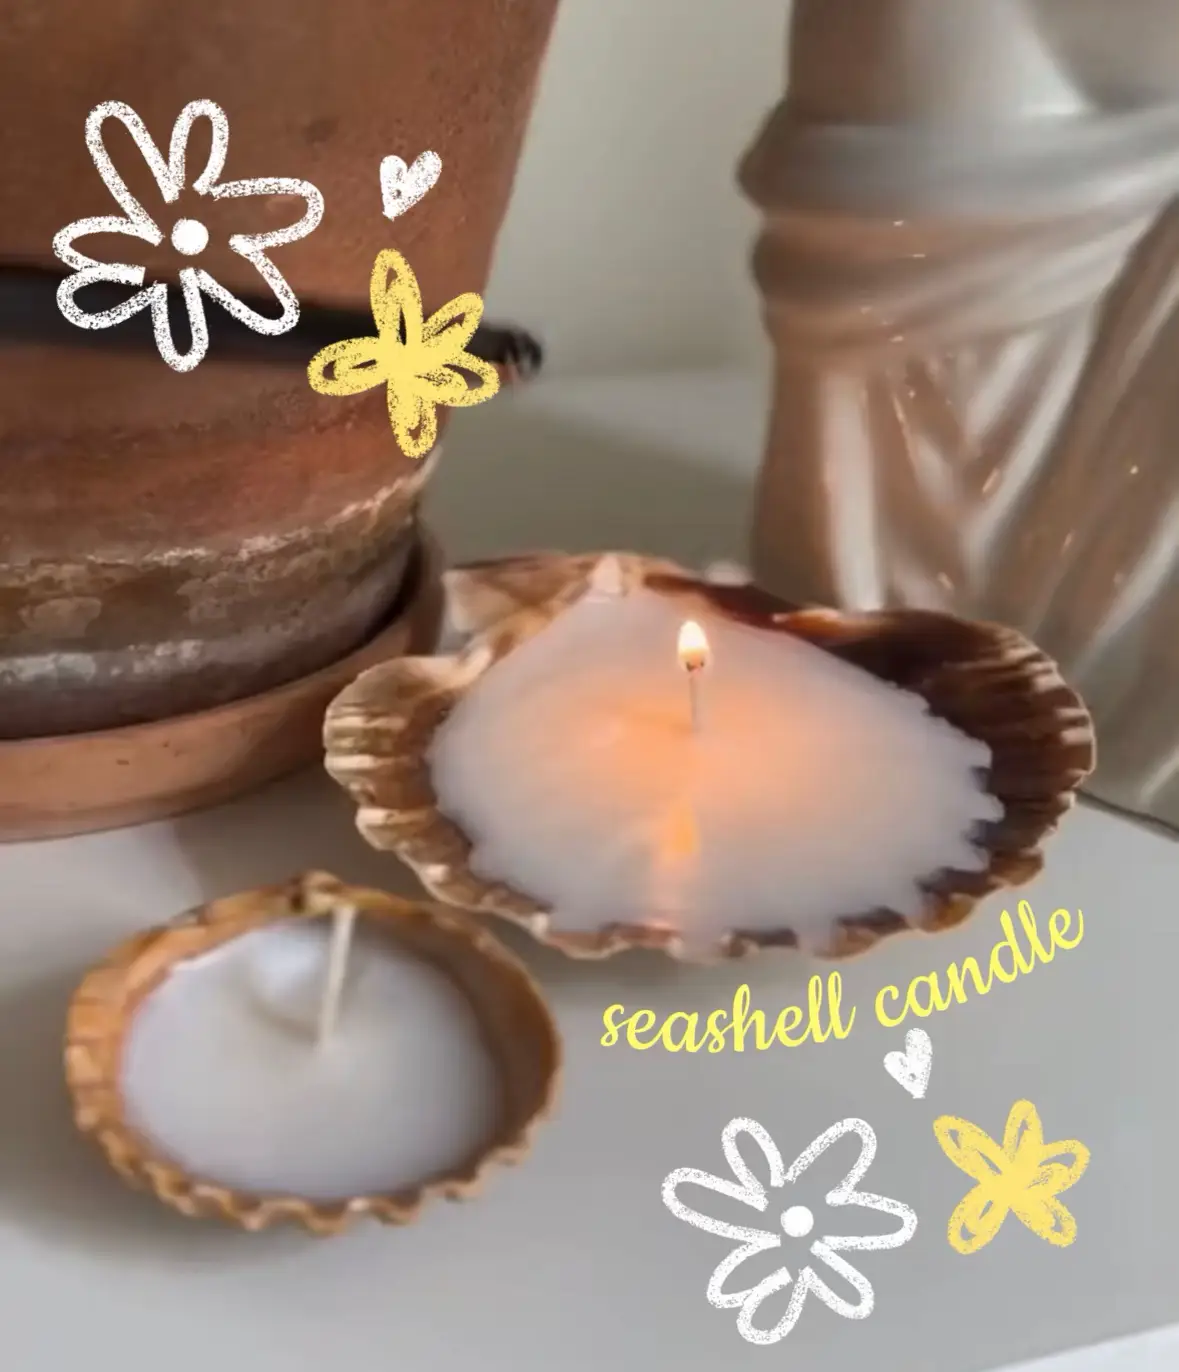  A candle with a flower on it is sitting on a plate.